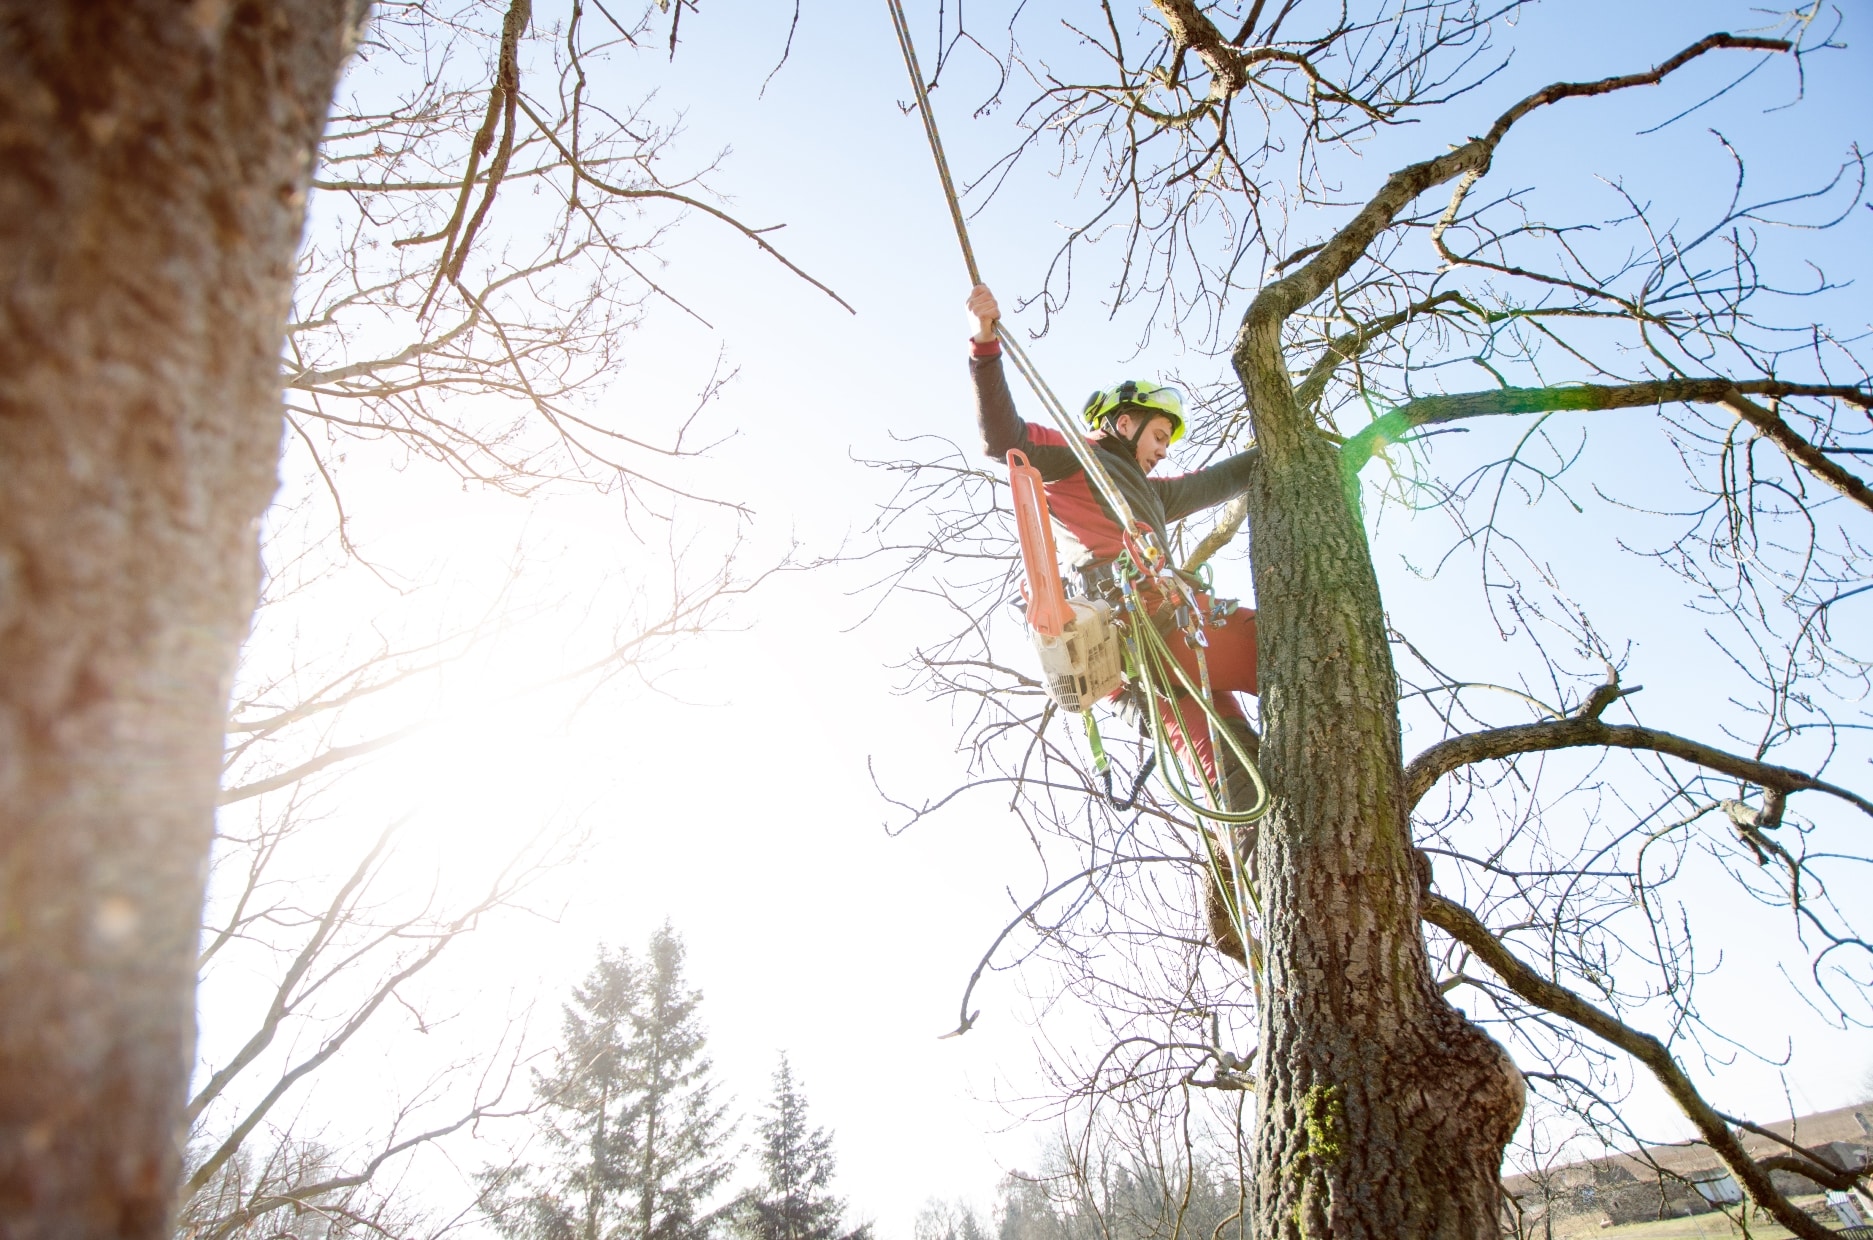 An arborist scales a tree to remove branches.